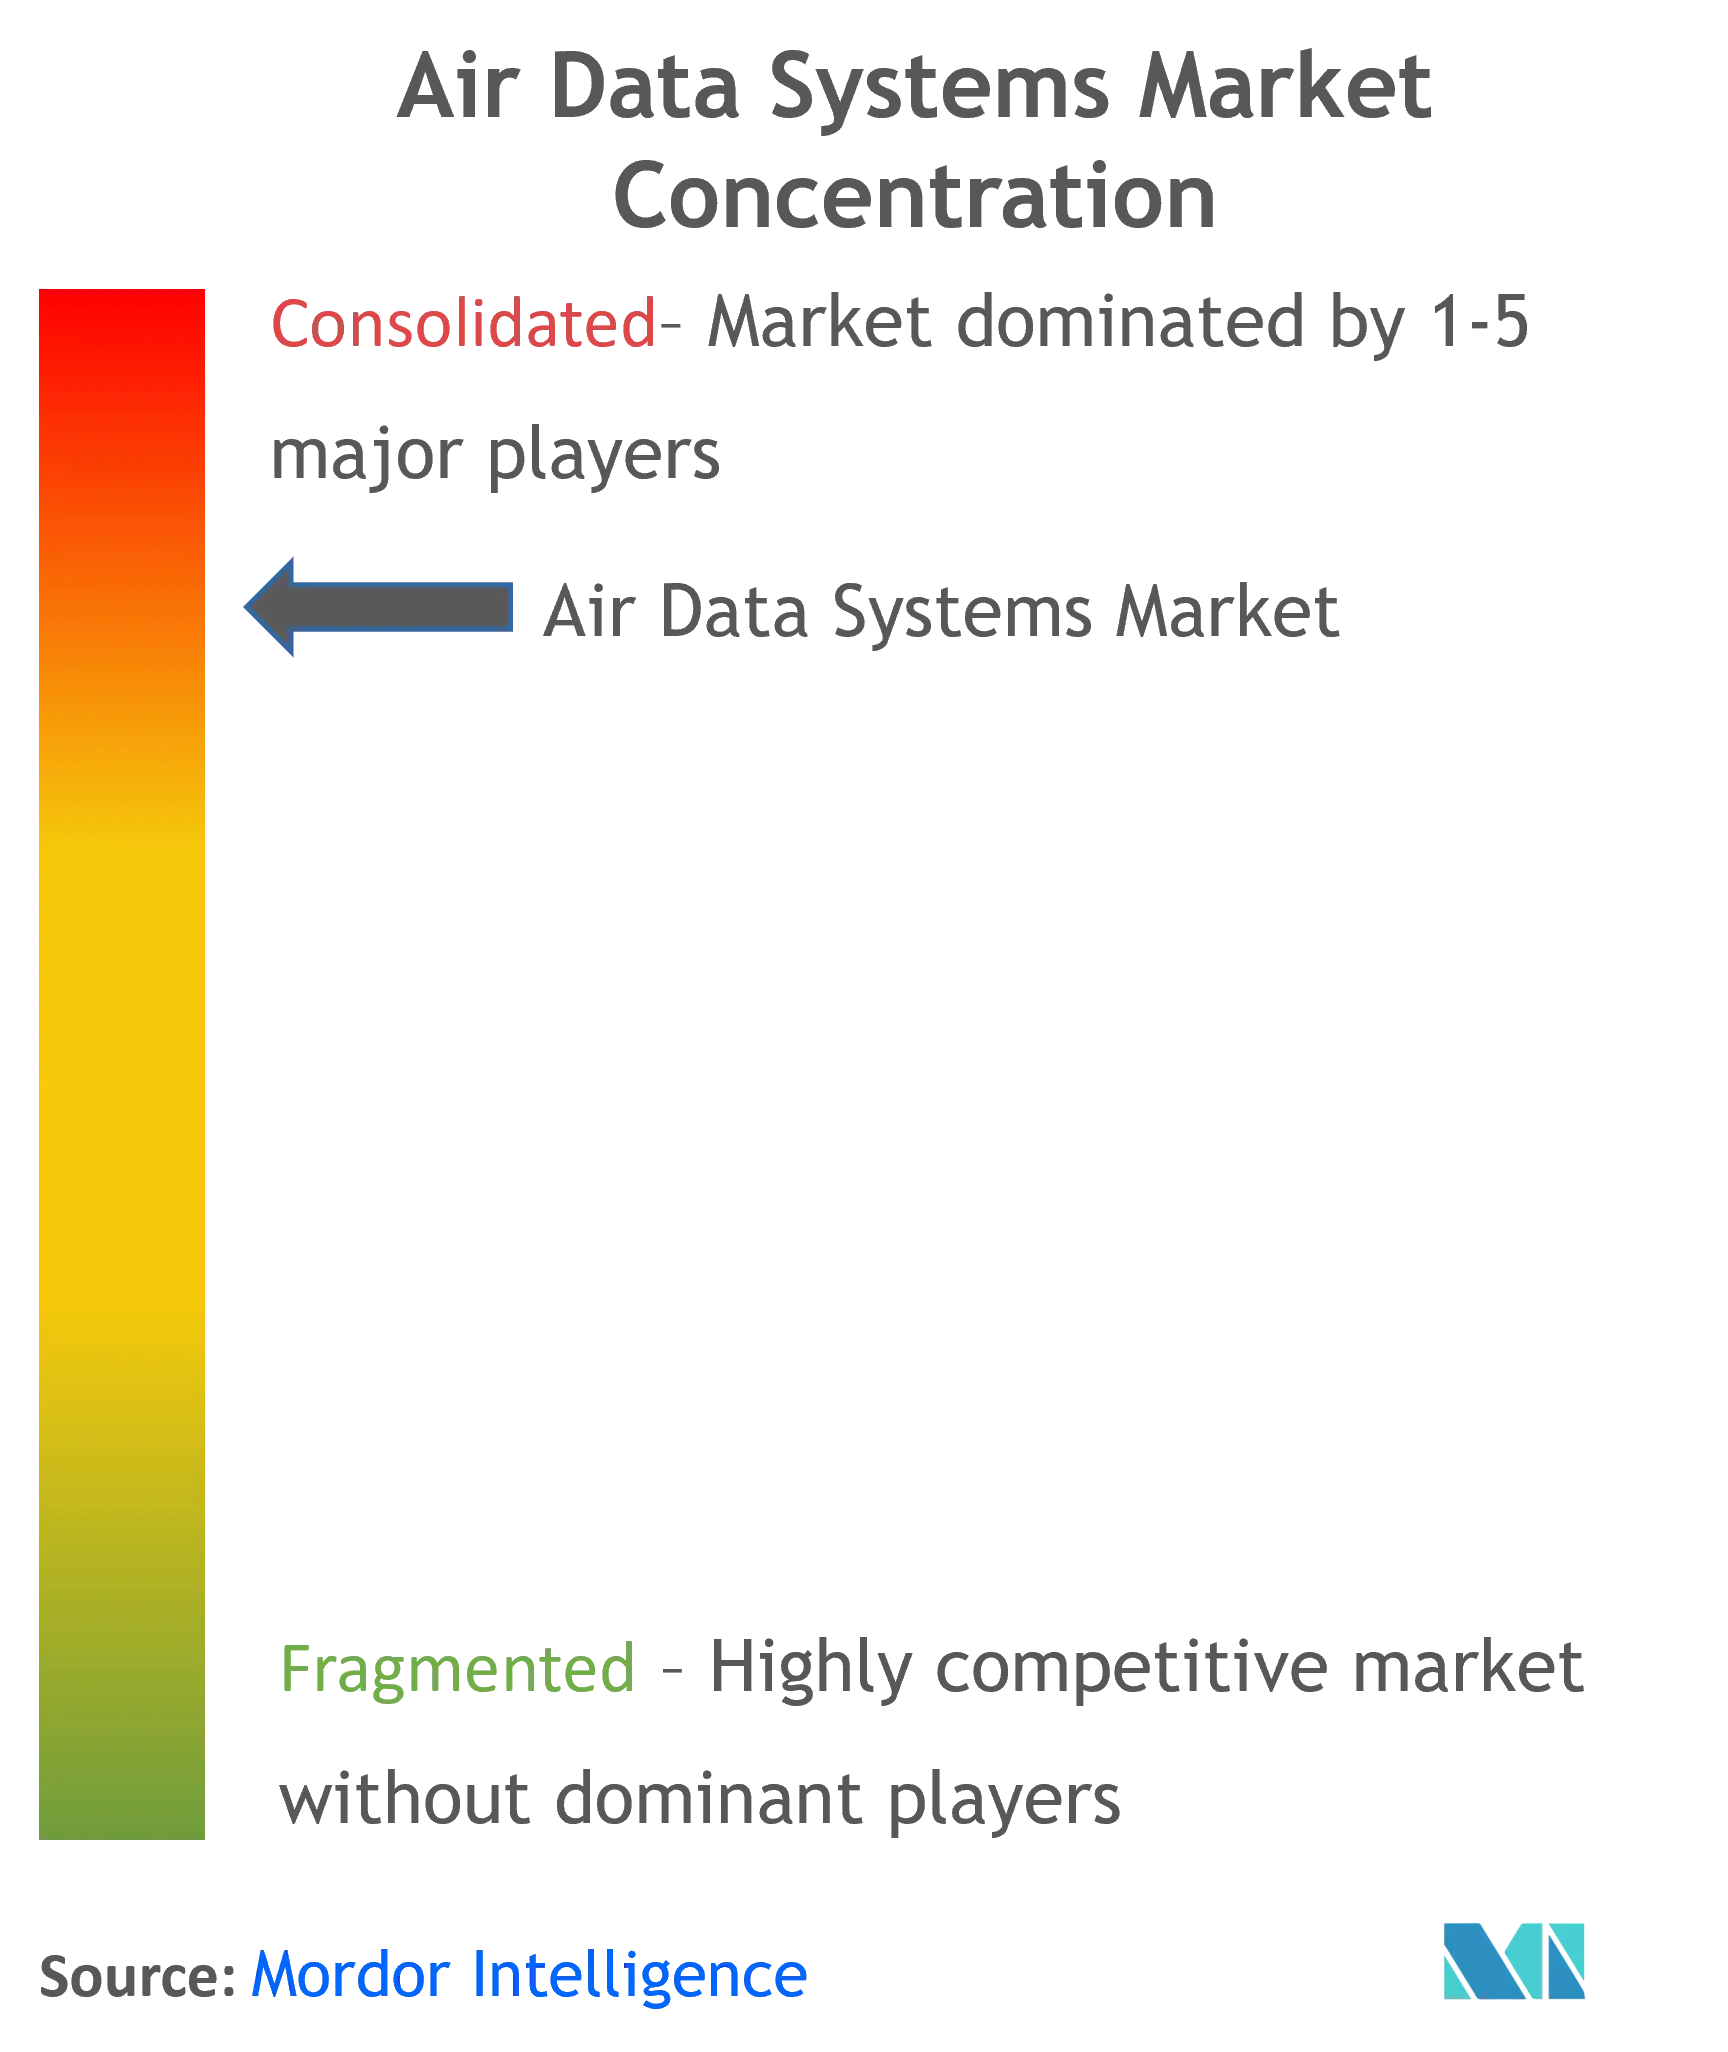 Air Data Systems Market Concentration